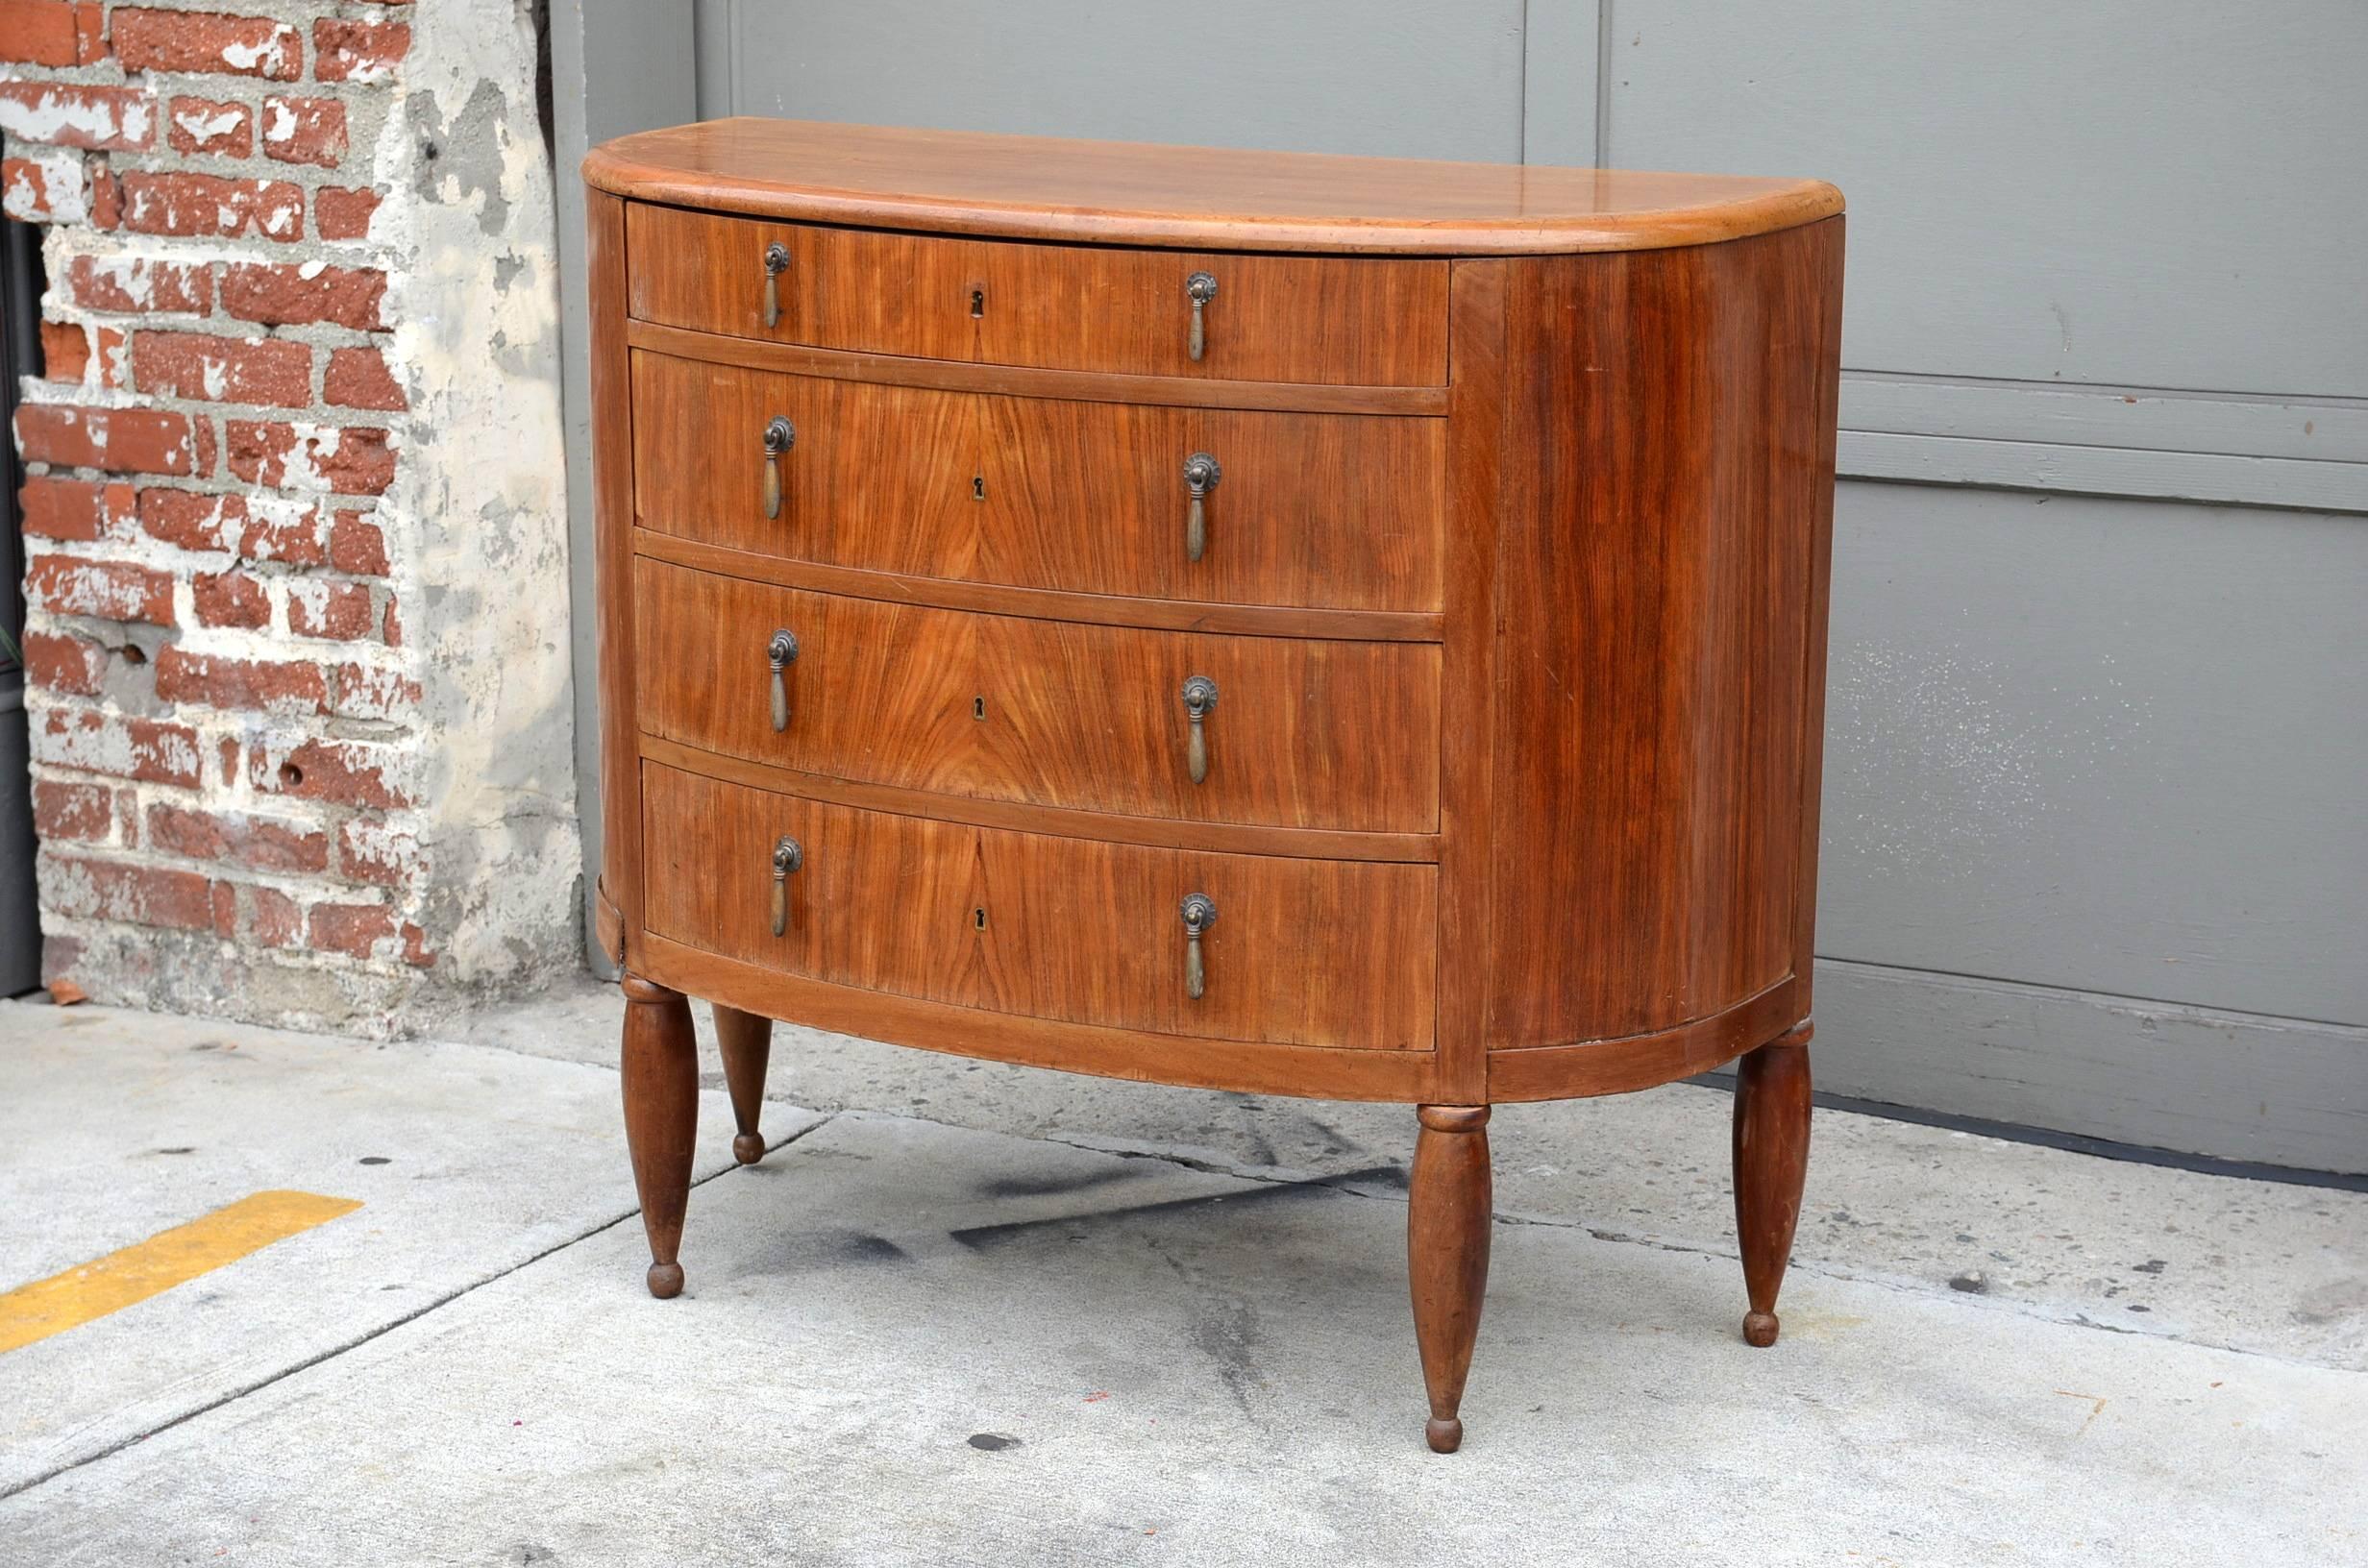 Exceptional Art Deco commode for la Société des artistes décorateurs (SAD).

Stamped: SAD on the back.

The Societé des artistes décorateurs (SAD, Society of Decorative Artists) was a French society of designers of furniture, interiors and